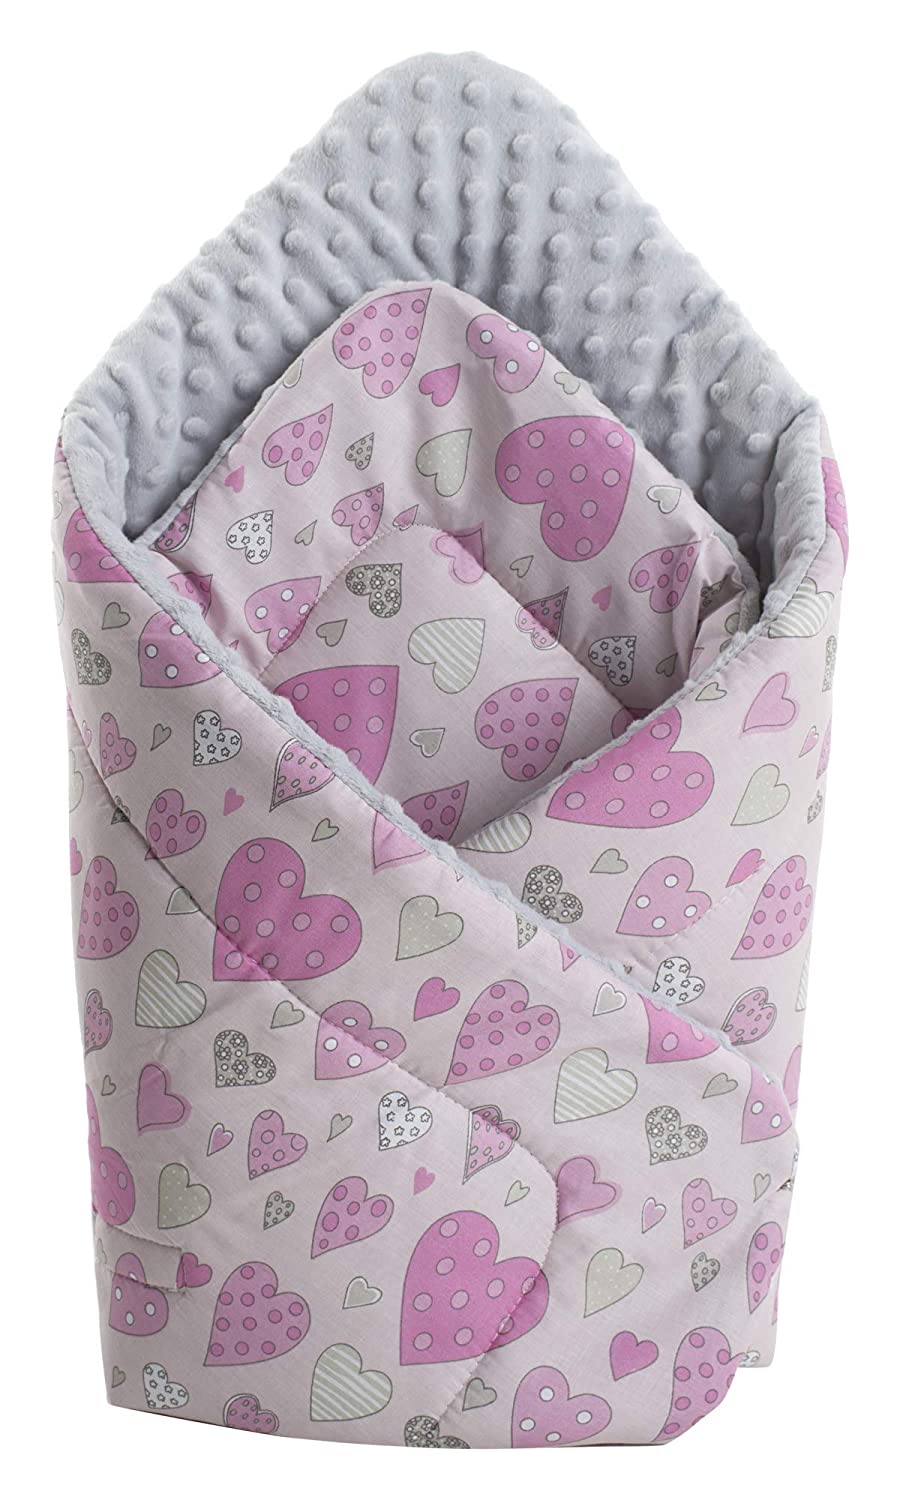 Medi Partners Swaddling Blanket 100% Cotton 75 x 75 cm Double Sided Soft All Year Round Multifunctional Anti-Allergic Babies (Pink Hearts with Grey Minky)